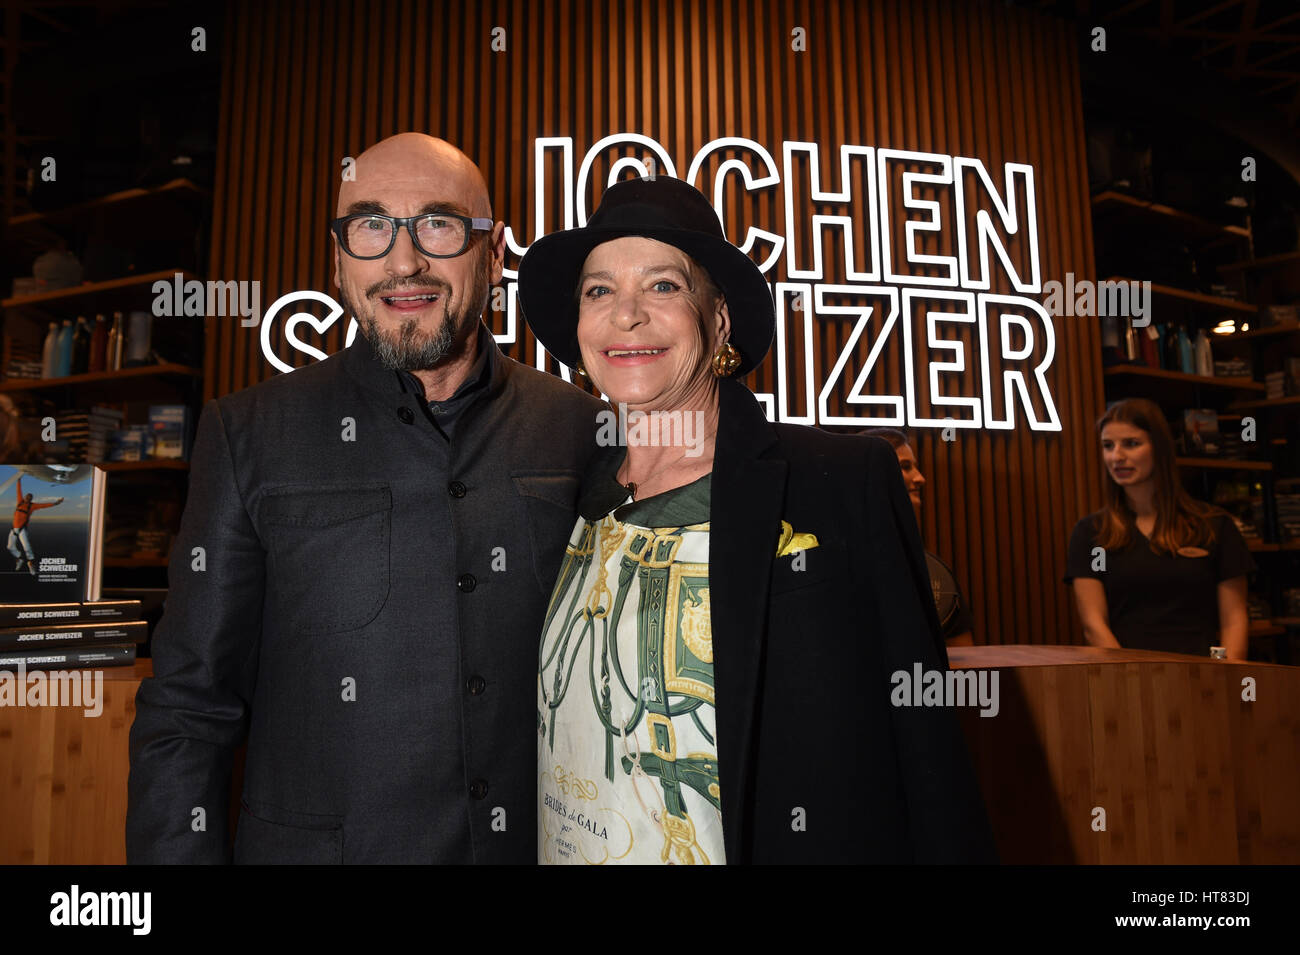 Taufkirchen, Germany. 08th Mar, 2017. Entrepreneur Jochen Schweizer and designer Barbara Engel at the so-called red carpet opening of a theme park at the Jochen Schweizer Arena in Taufkirchen, Germany, 08 March 2017. Photo: Felix Hörhager/dpa/Alamy Live News Stock Photo